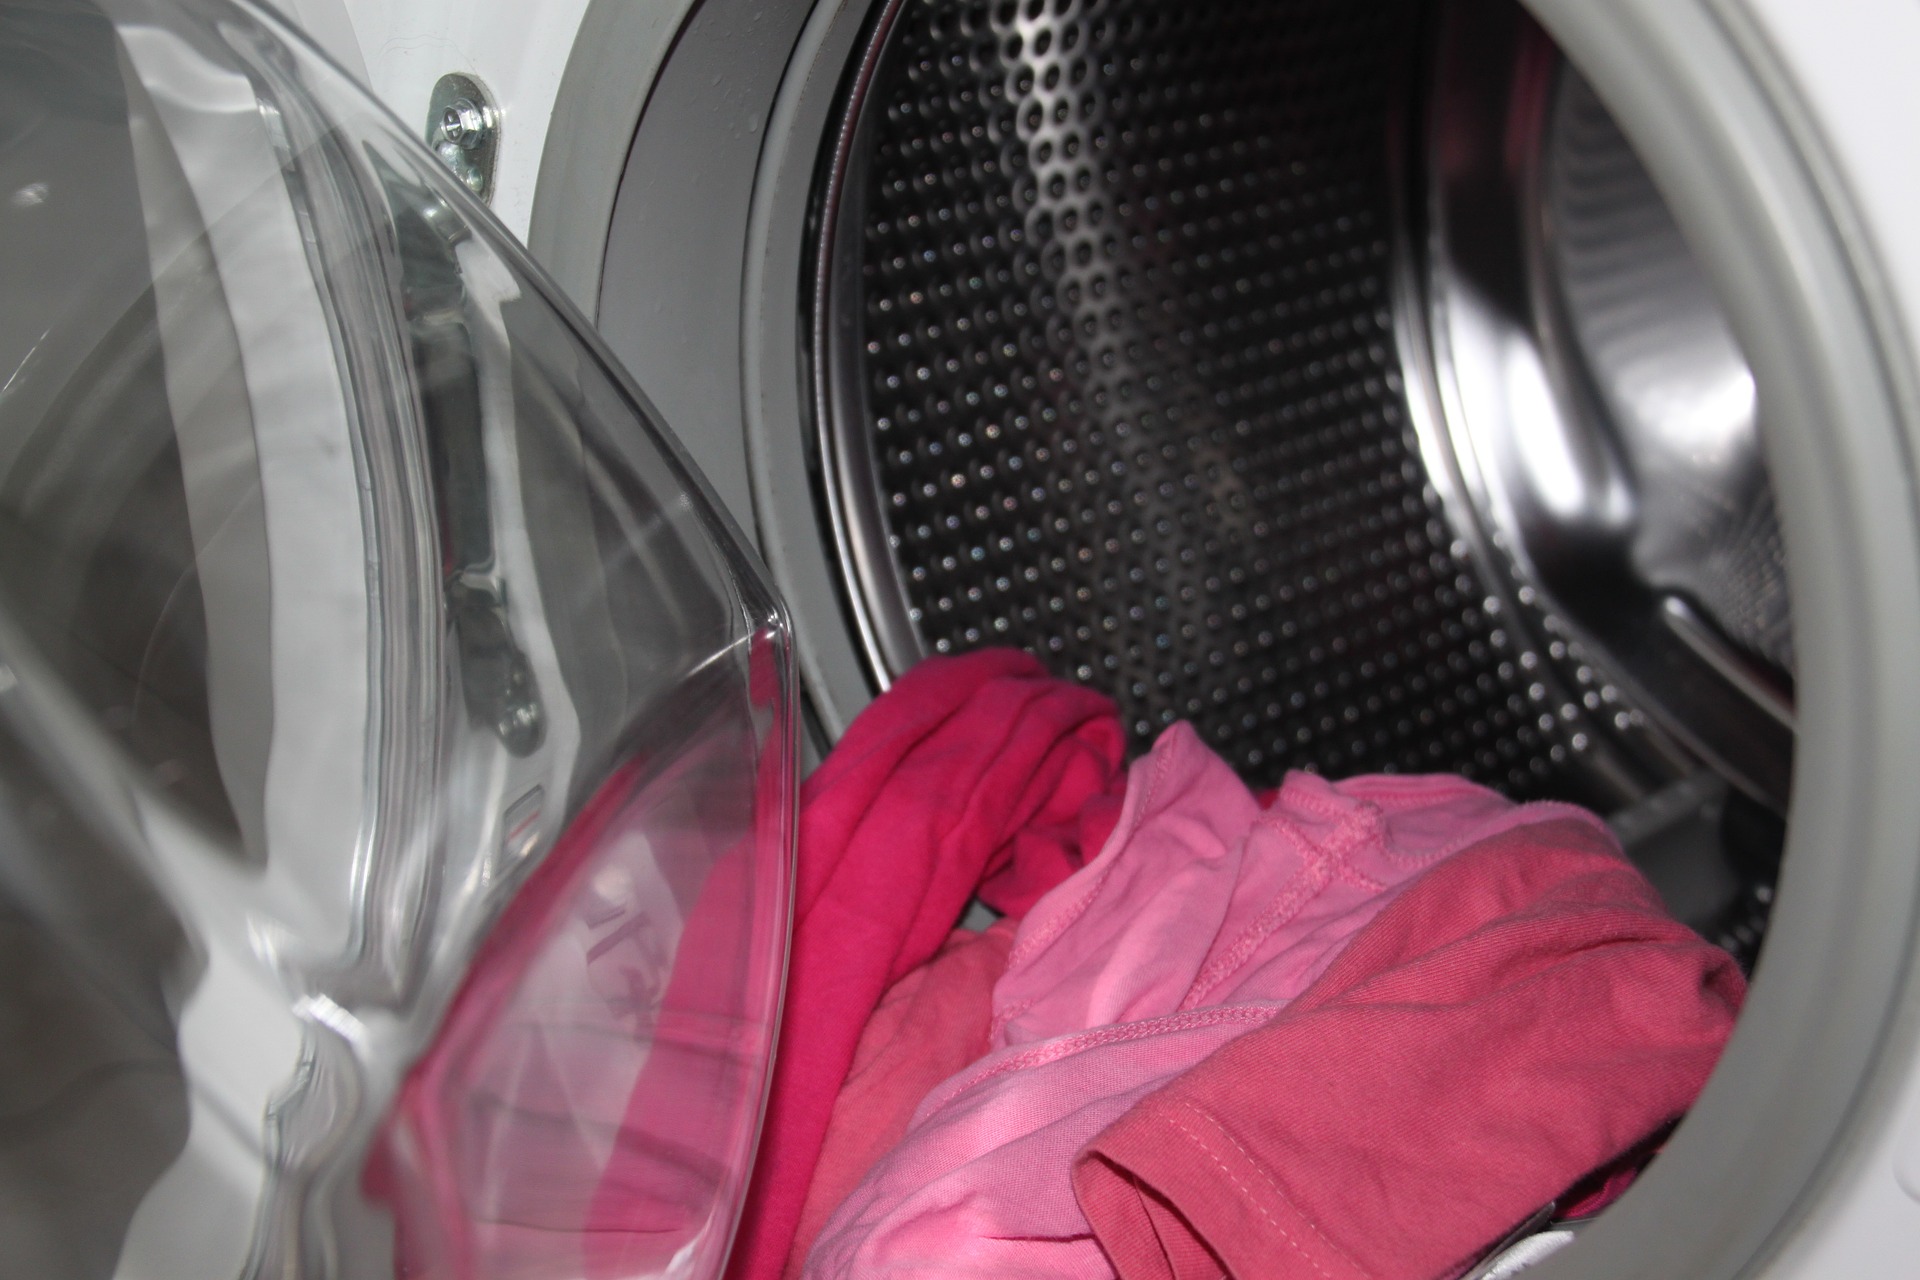 washing machine with clothes